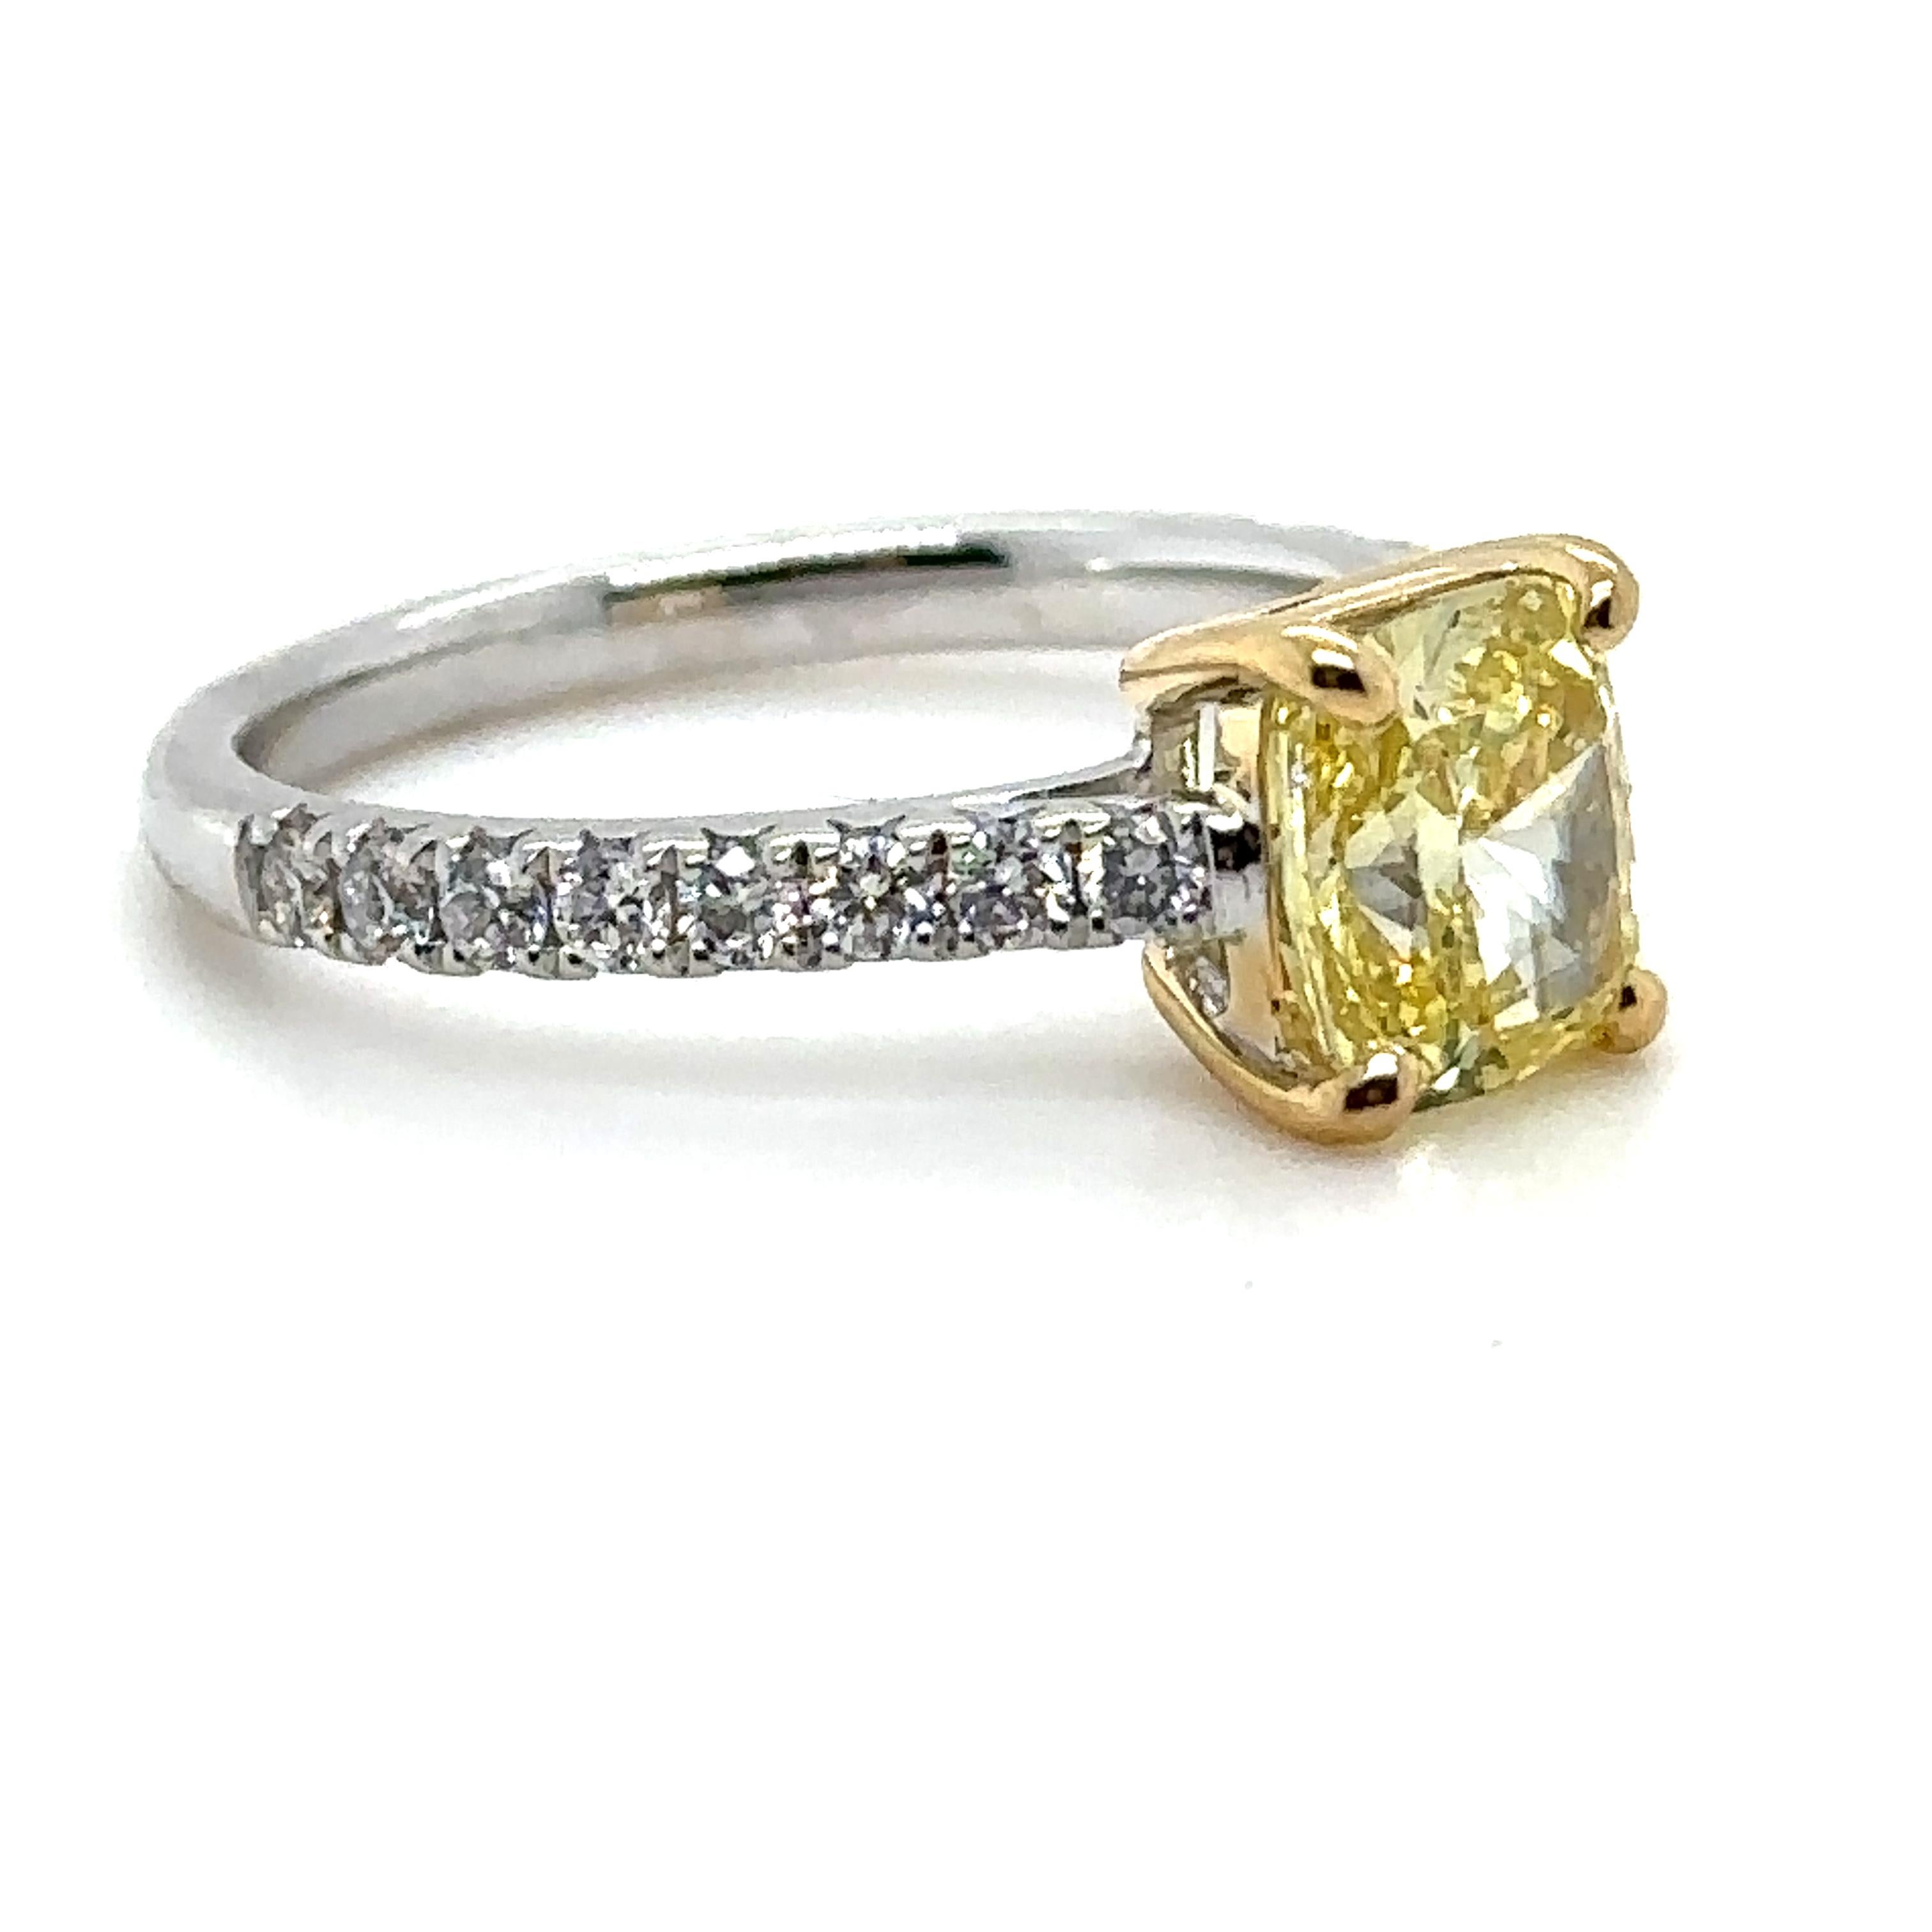 Unique features:

A Bespoke diamond engagement ring, made of 18ct Yellow and White Gold, and weighing 3.26gm. Stamped: 750.

Set with a Cushion, brilliant cut Diamond, colour intense fancy yellow, and clarity VS2. Weighing 1.63 ct. Certificate